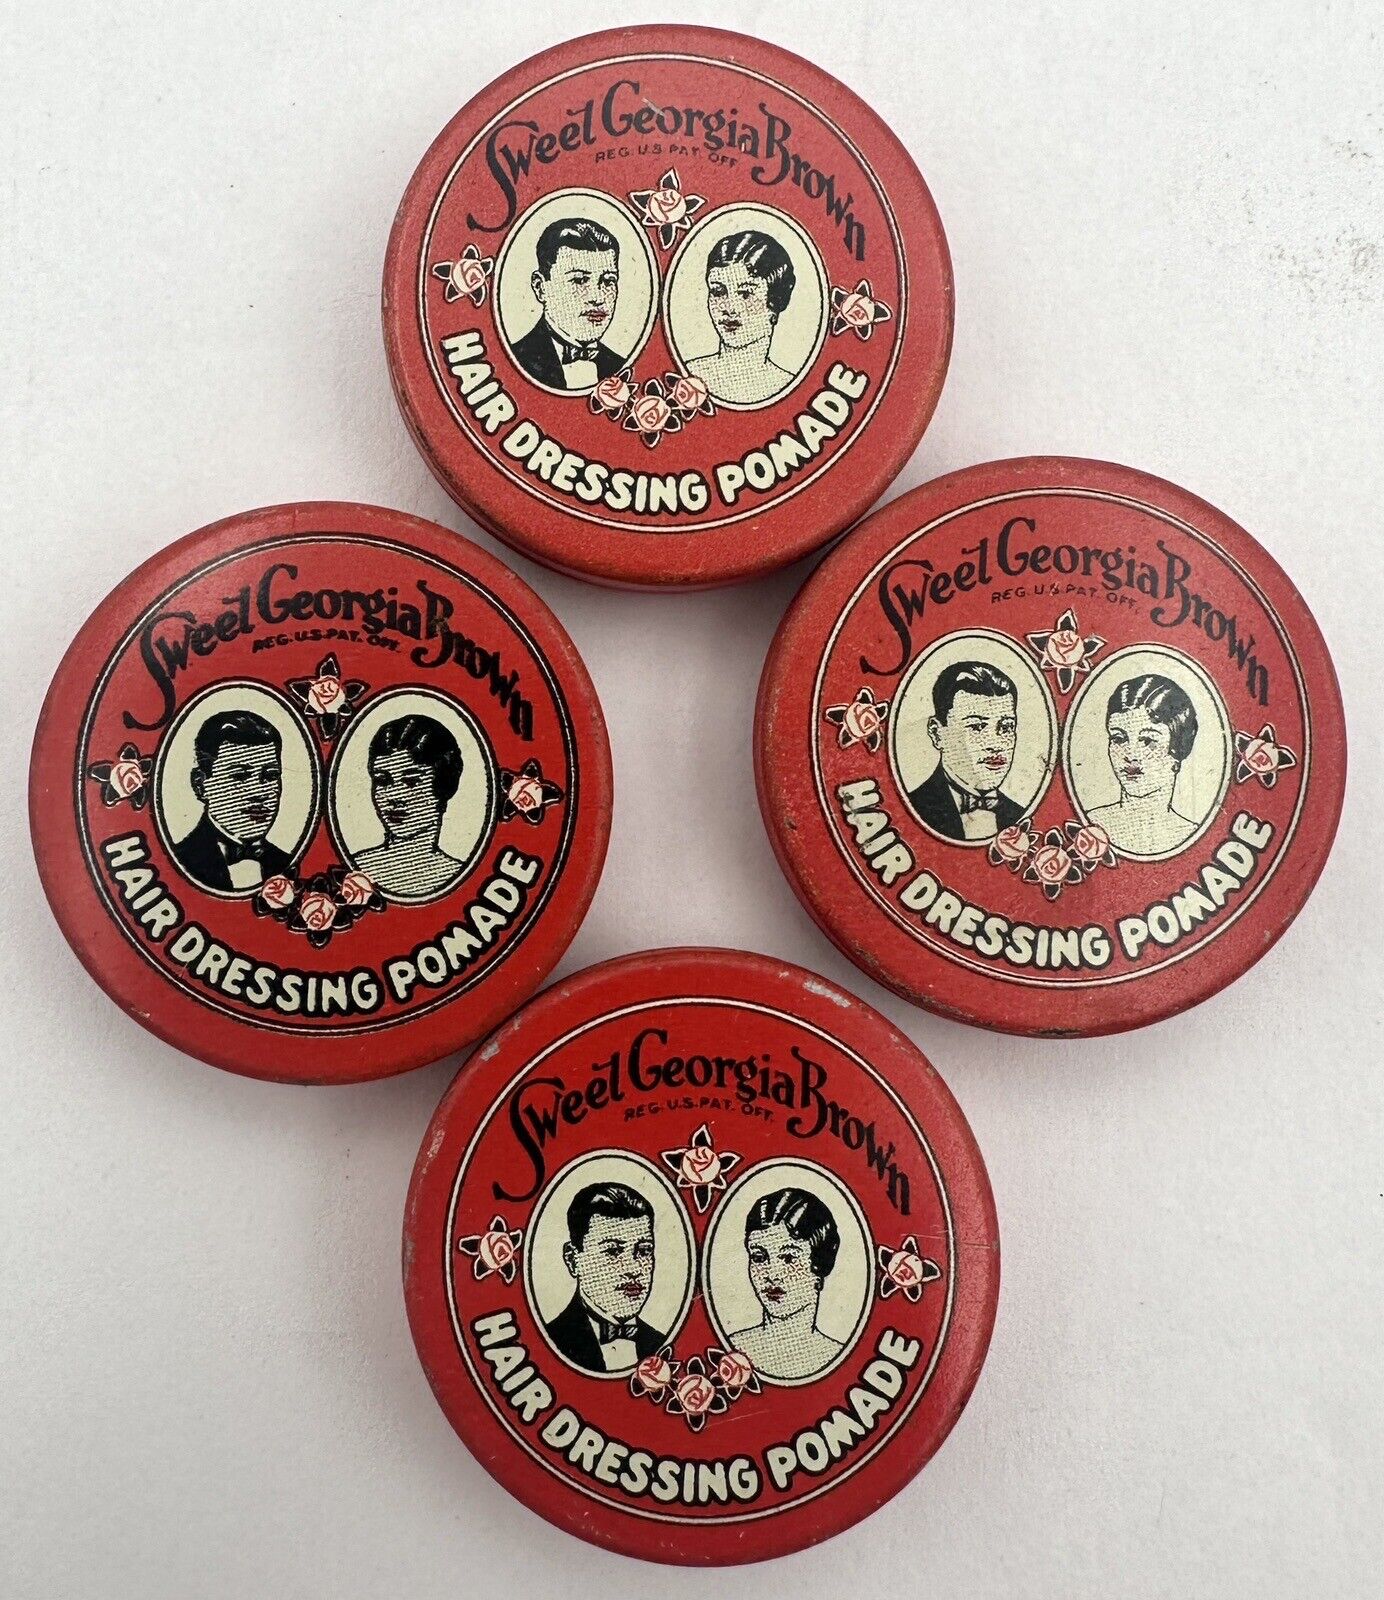 Vintage Sweet Georgia Brown Hair Dressing Pomade Tins Empty Chicago Lot of 4